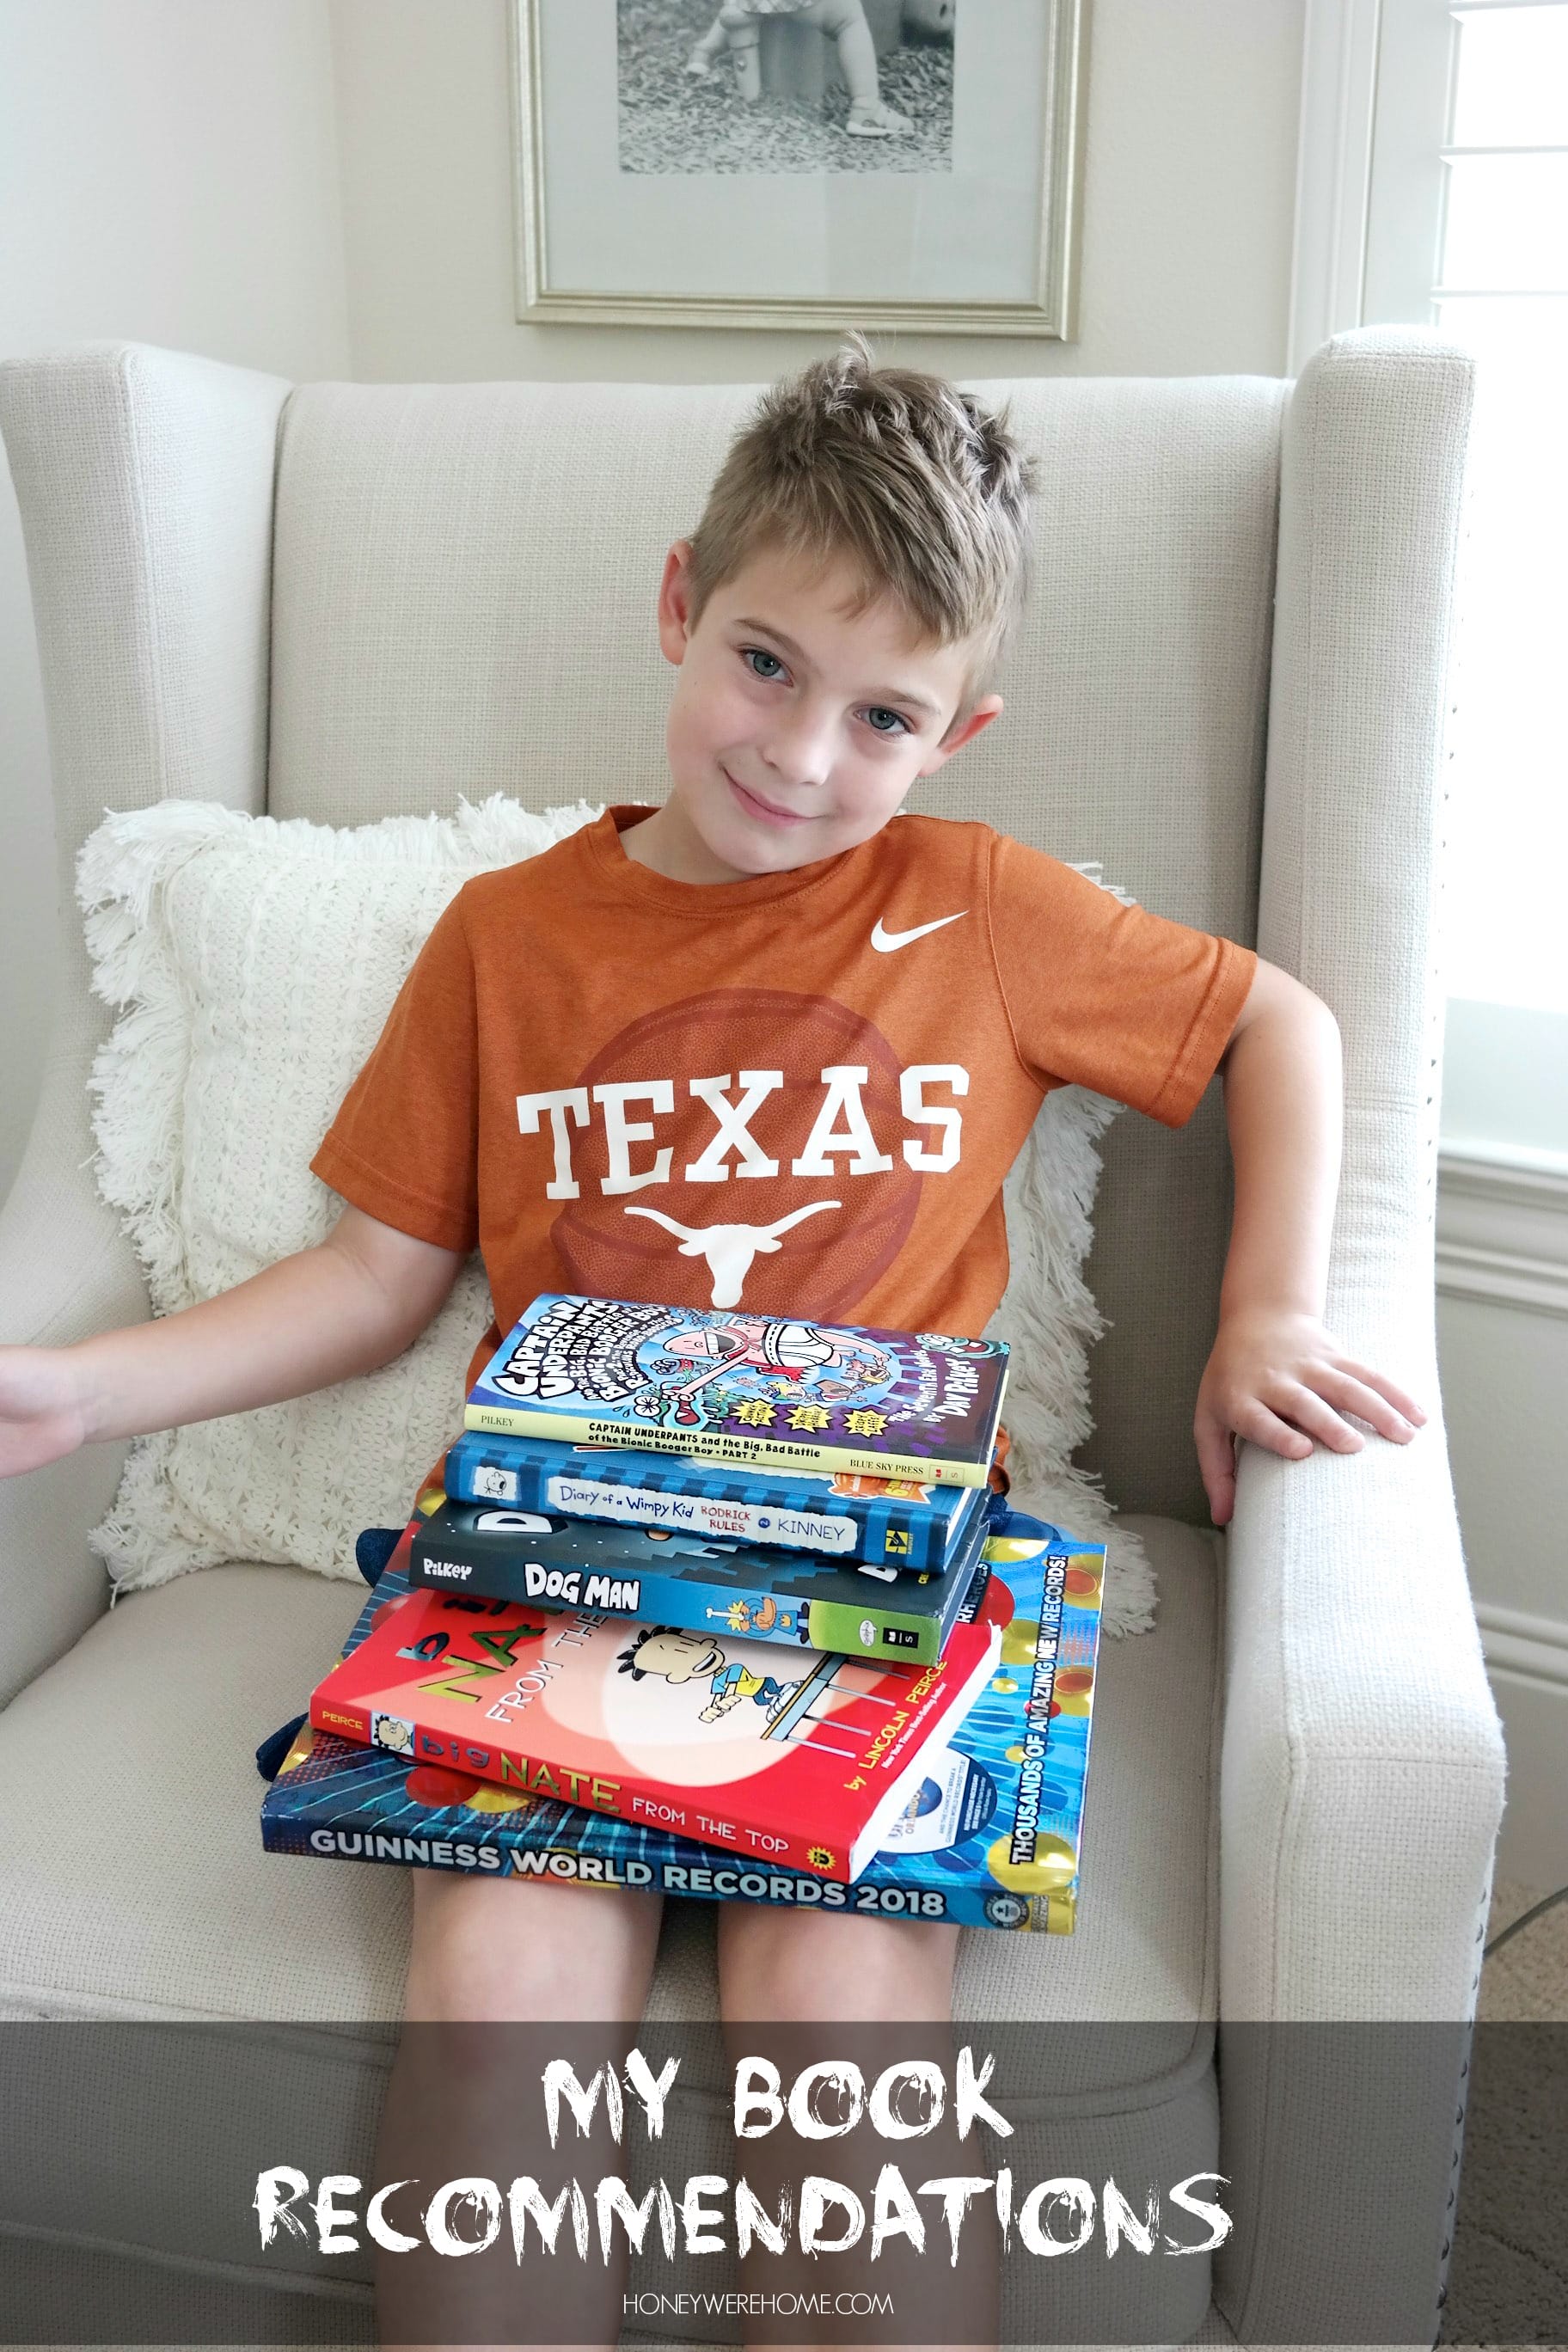 James’ Book Recommendations: Best Books for 8 Year Olds